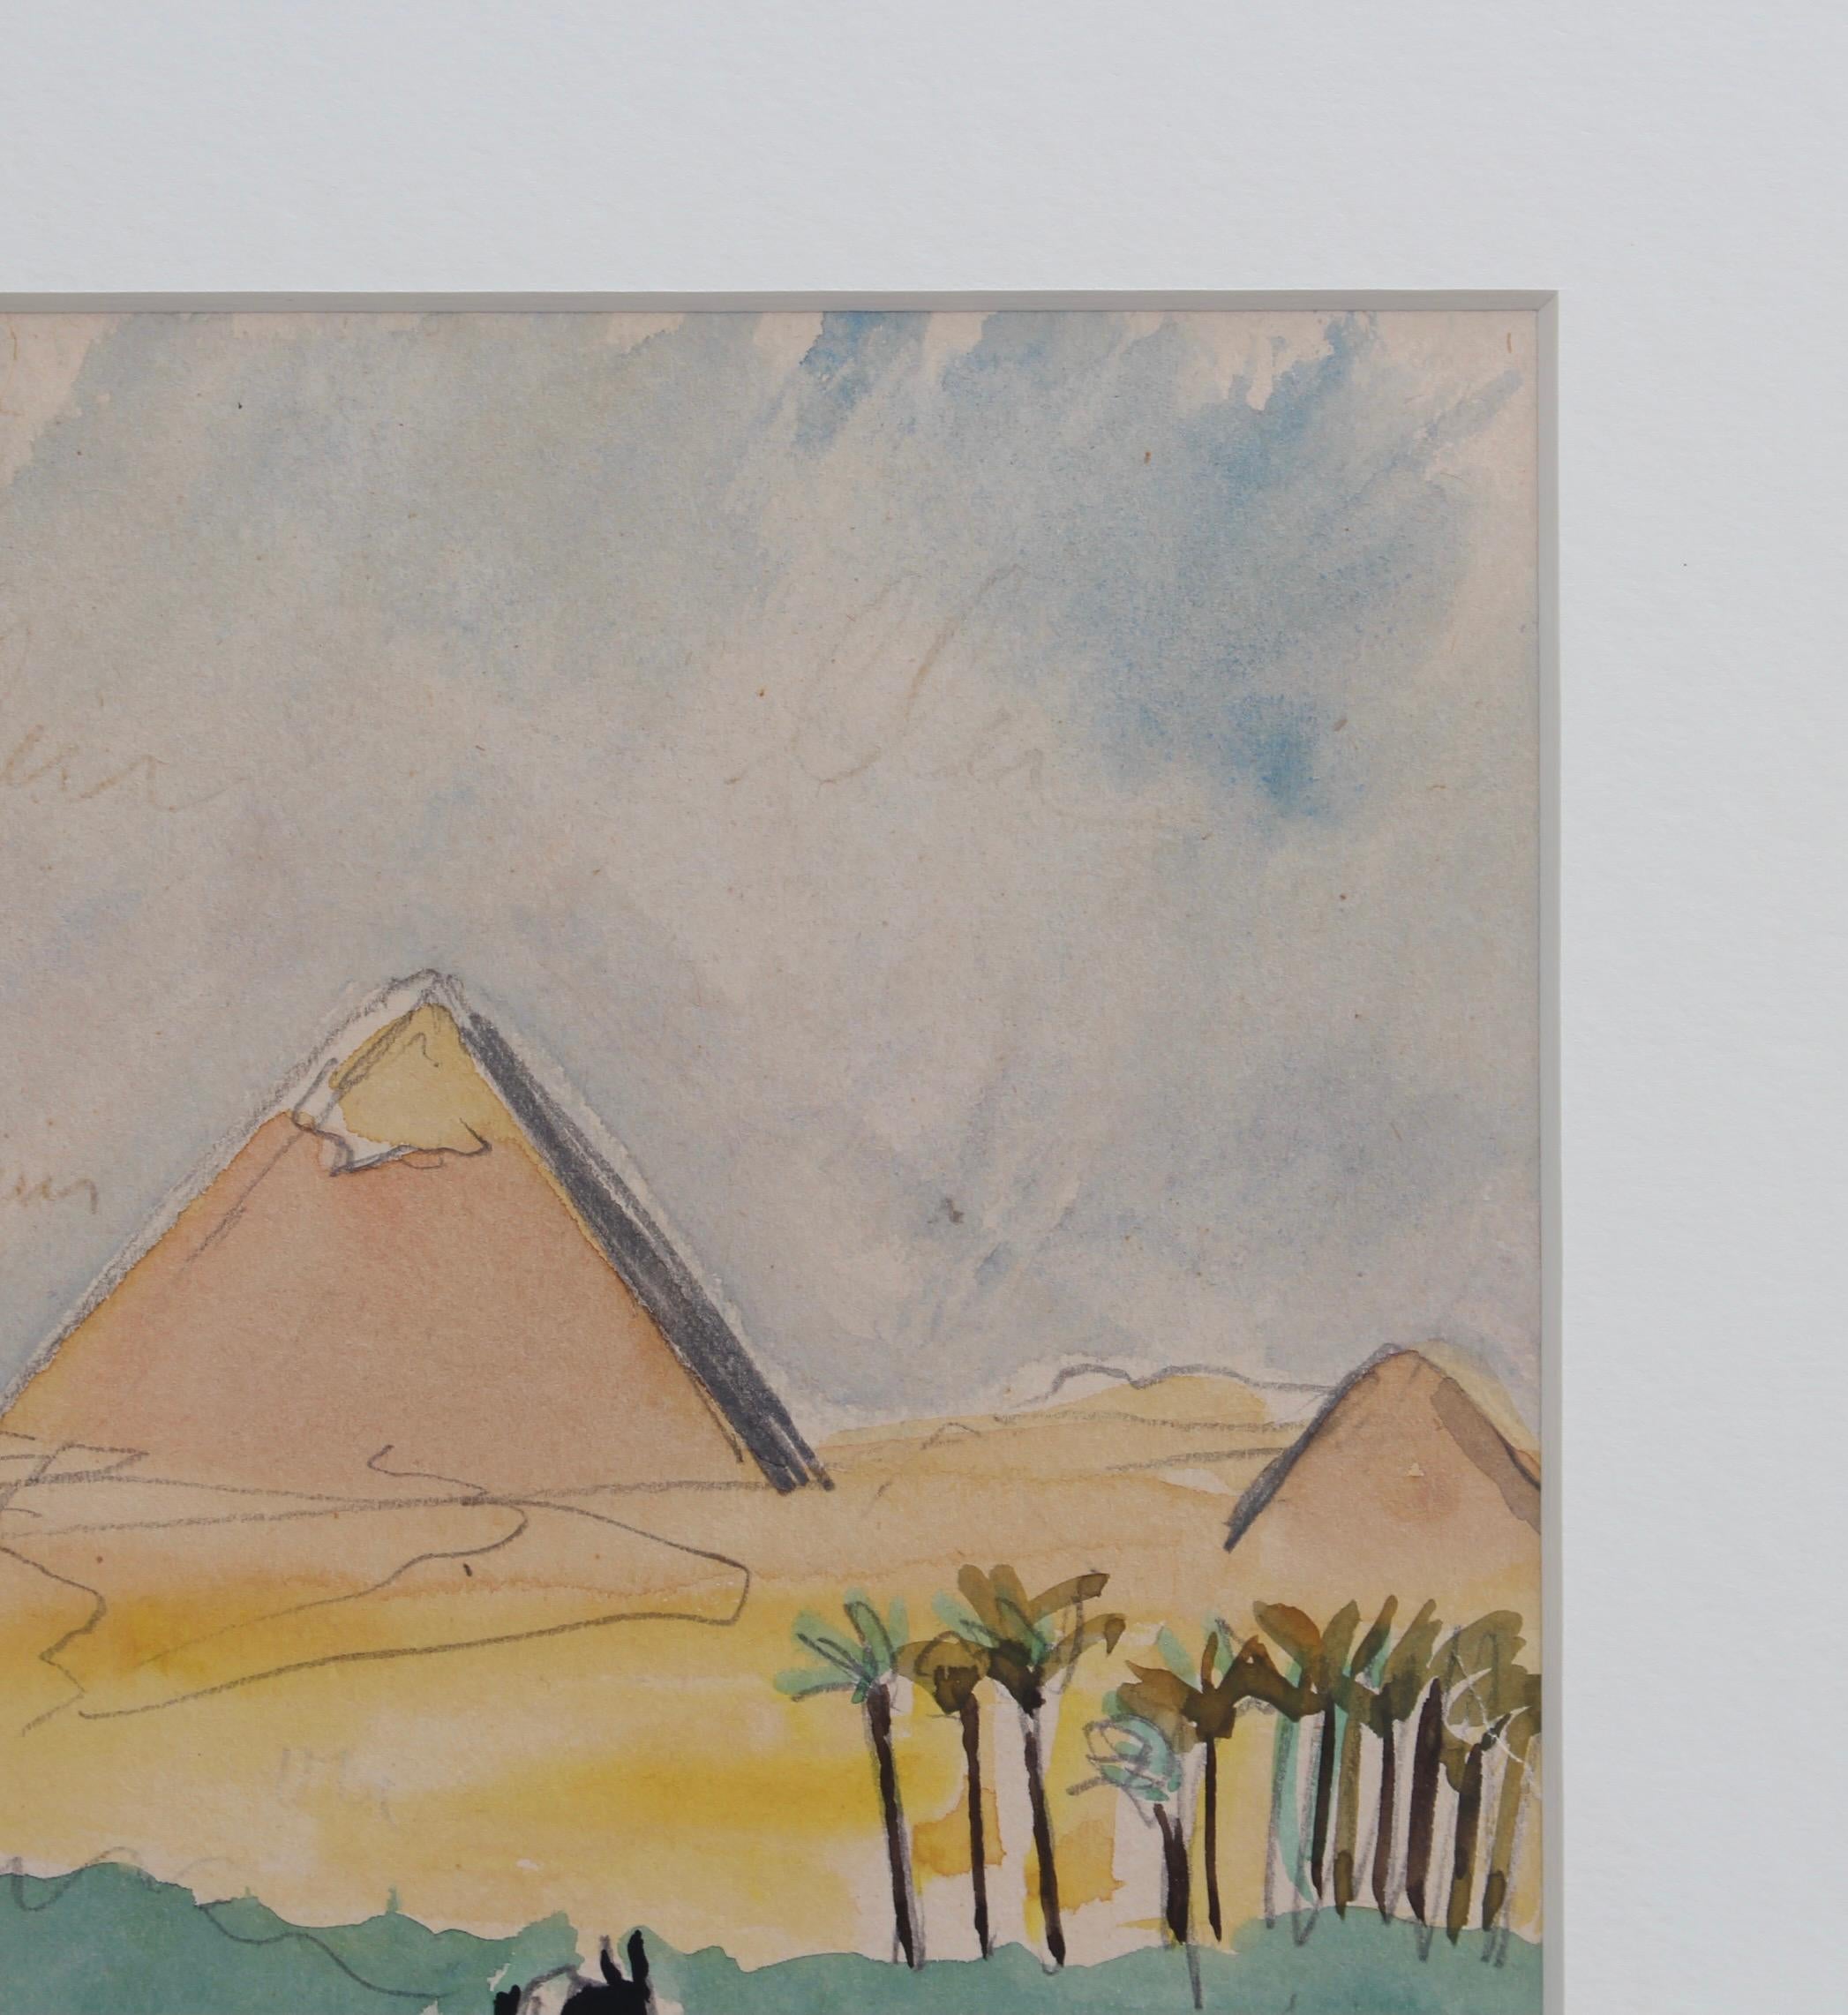 'The Pyramids of Giza', watercolour and pencil on art paper, by Yves Brayer (1966). The artist explored and painted the world during his extensive travels after the war. He spent time in Italy, Spain, Russia, Turkey, Japan, Mexico, the United States